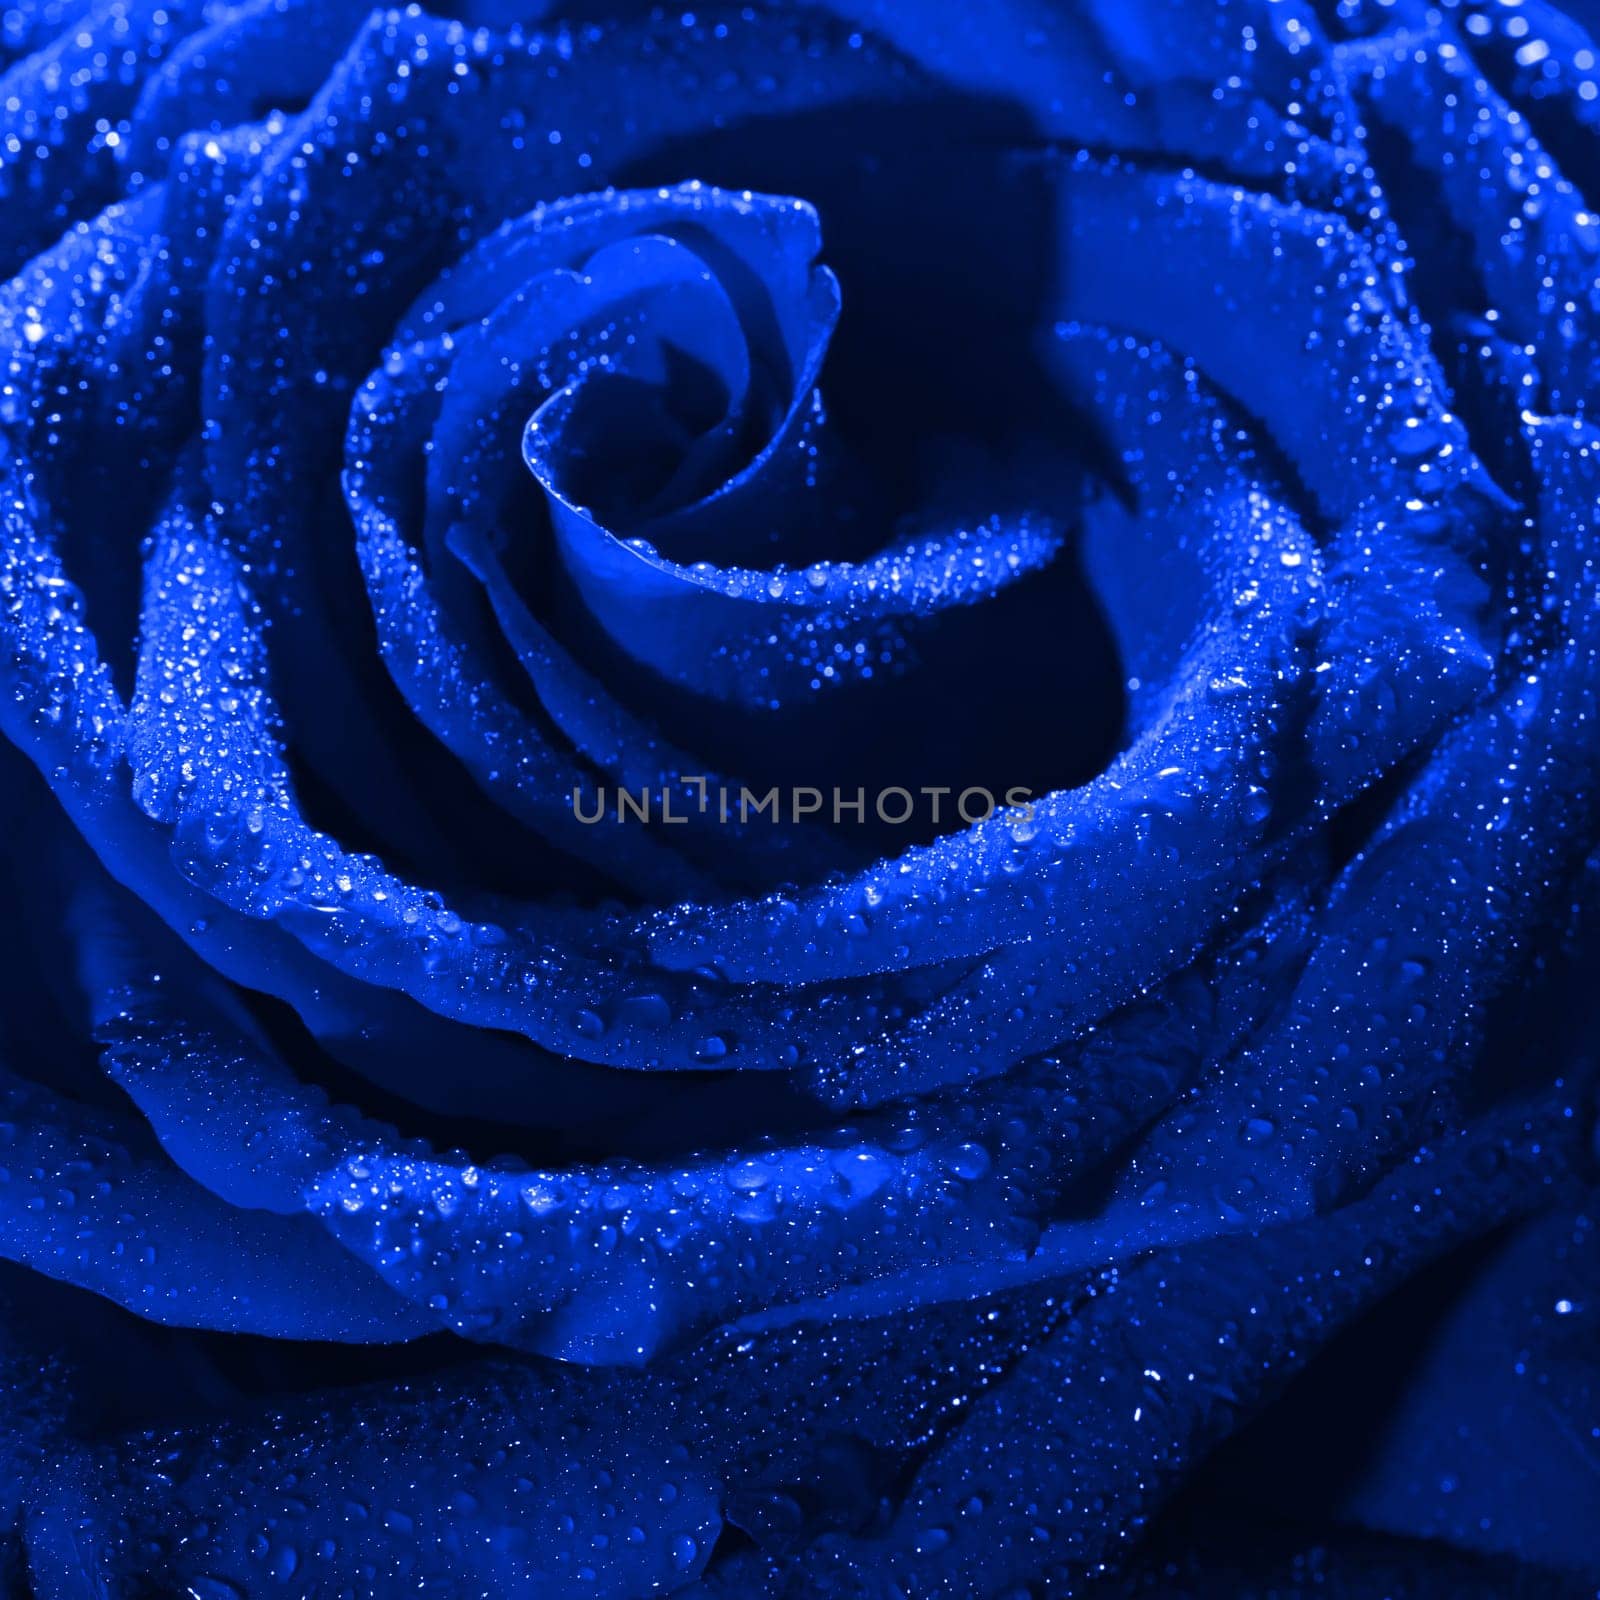 Blooming blue rose bud in water drops close-up on a black background, use as background, wallpaper, greeting card